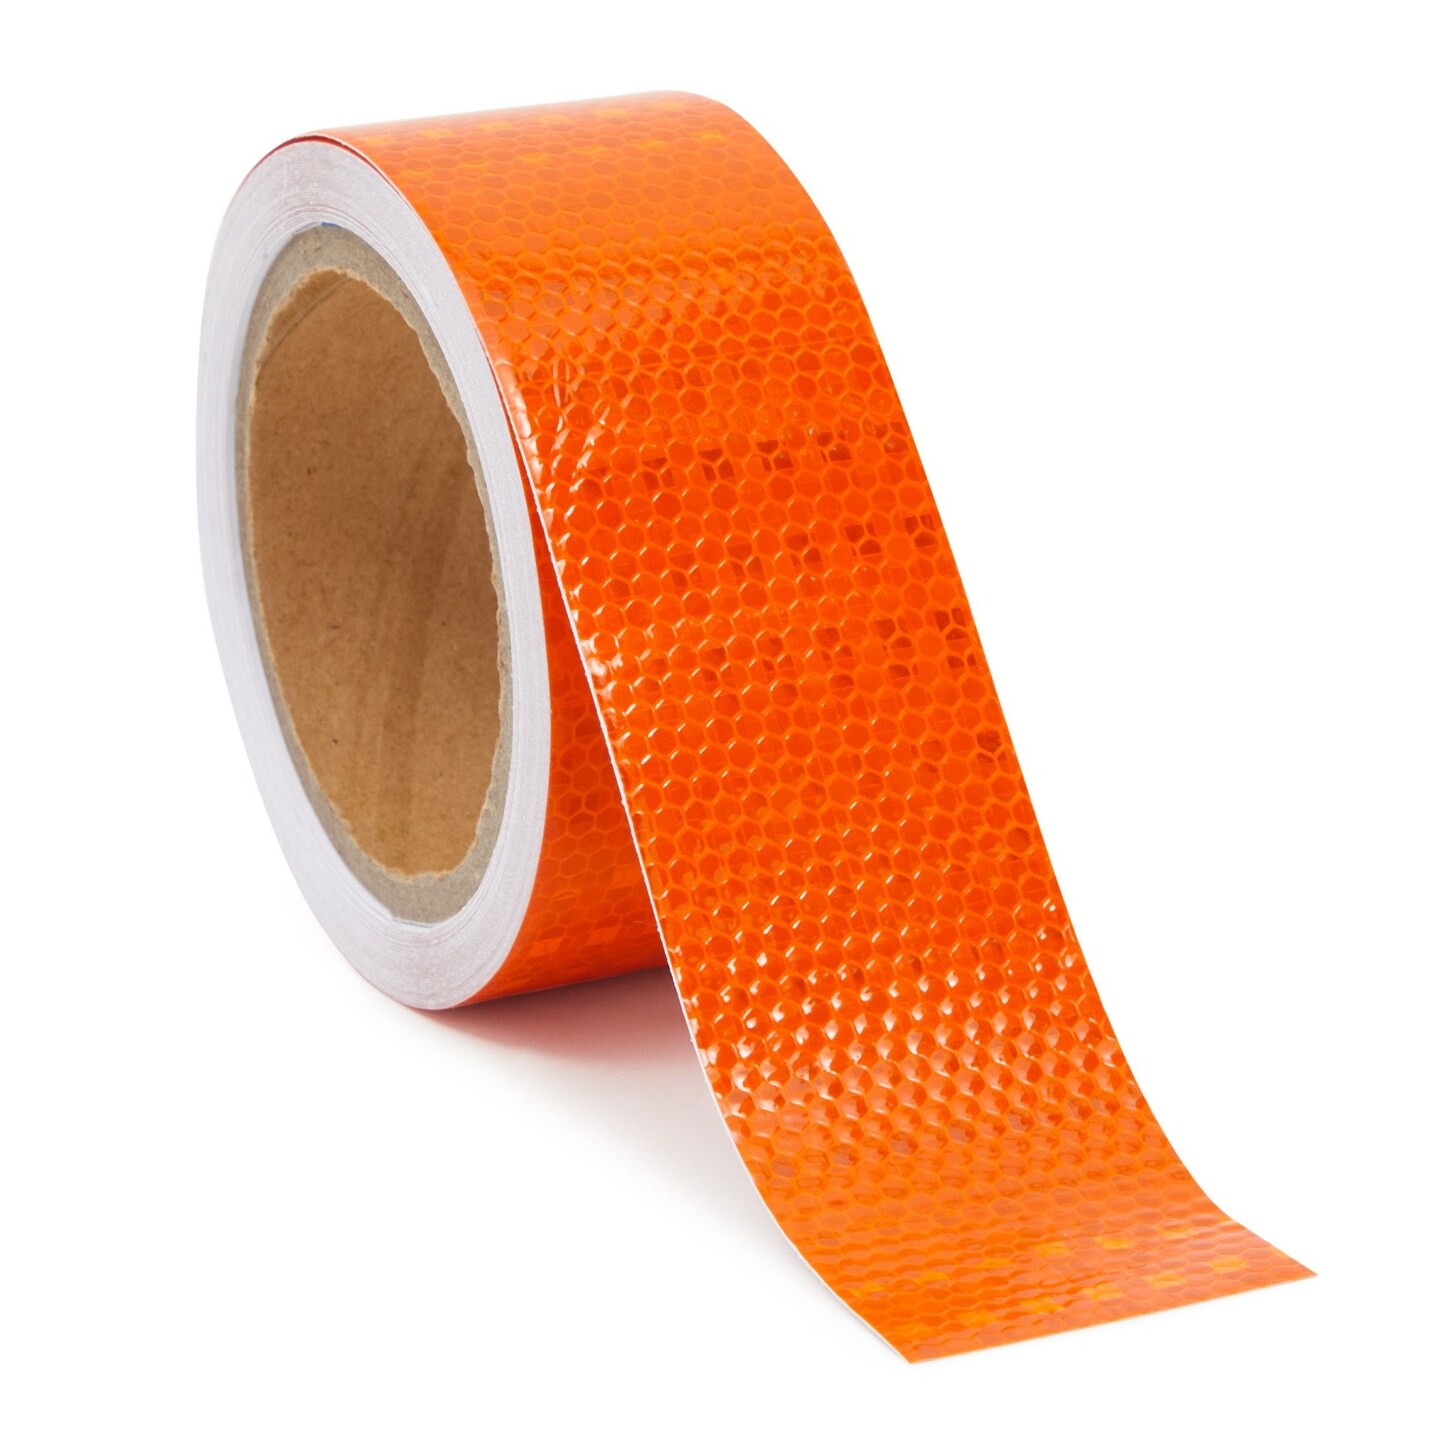 Reflective Tape - Neon Orange Outdoor Reflector Safety Roll for Trailers, Warning, Signs, Stairs, Bikes (2 In x 30 FT)